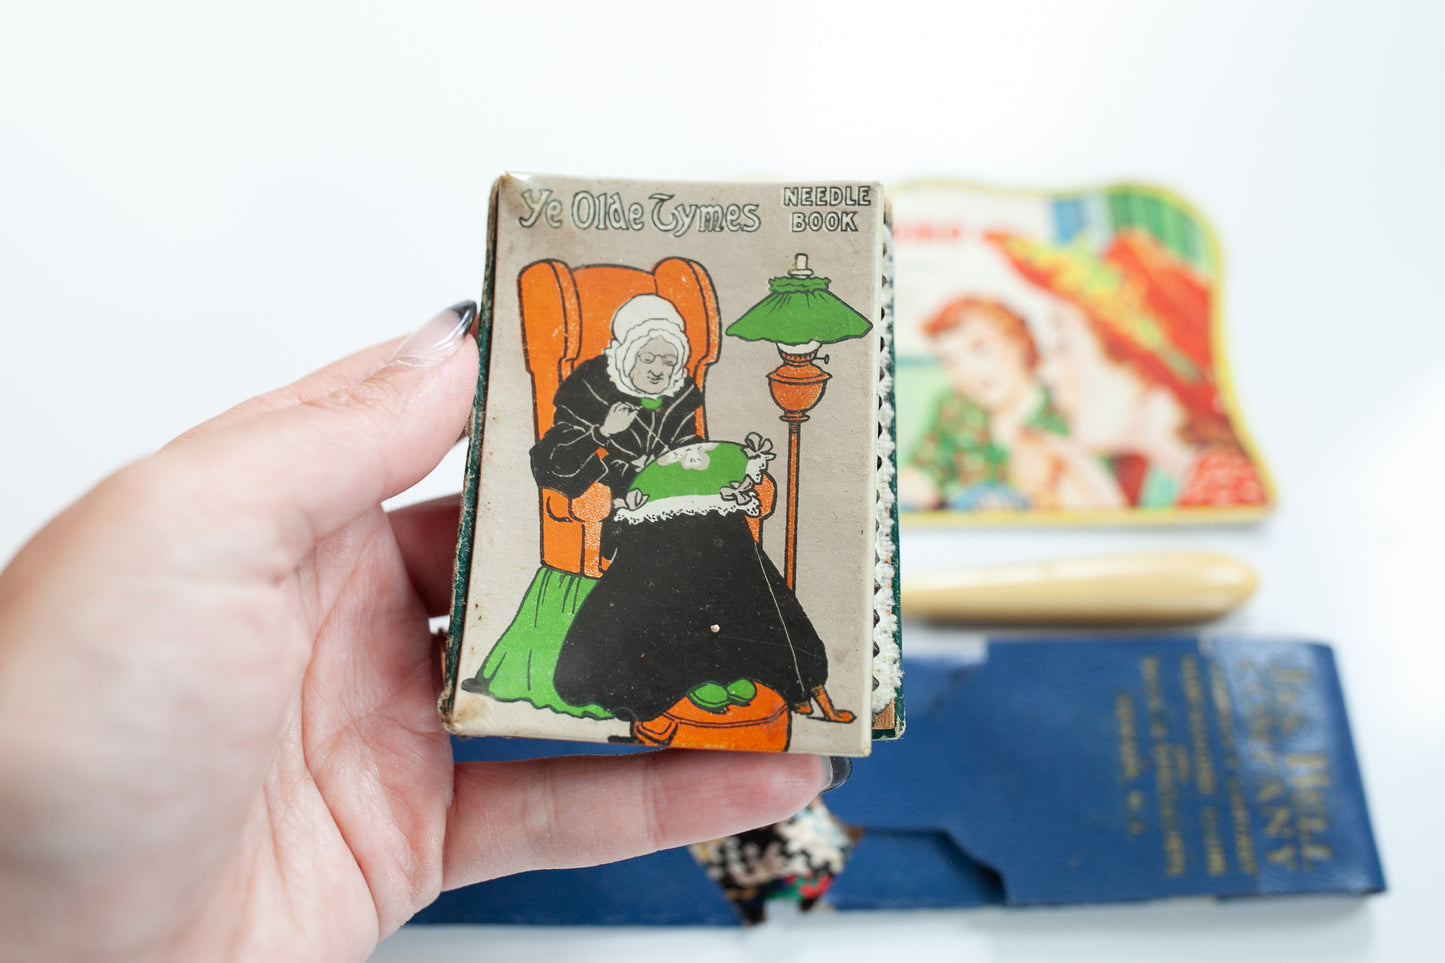 Vintage Sewing- Sewing Needle Books -Sewing Kit